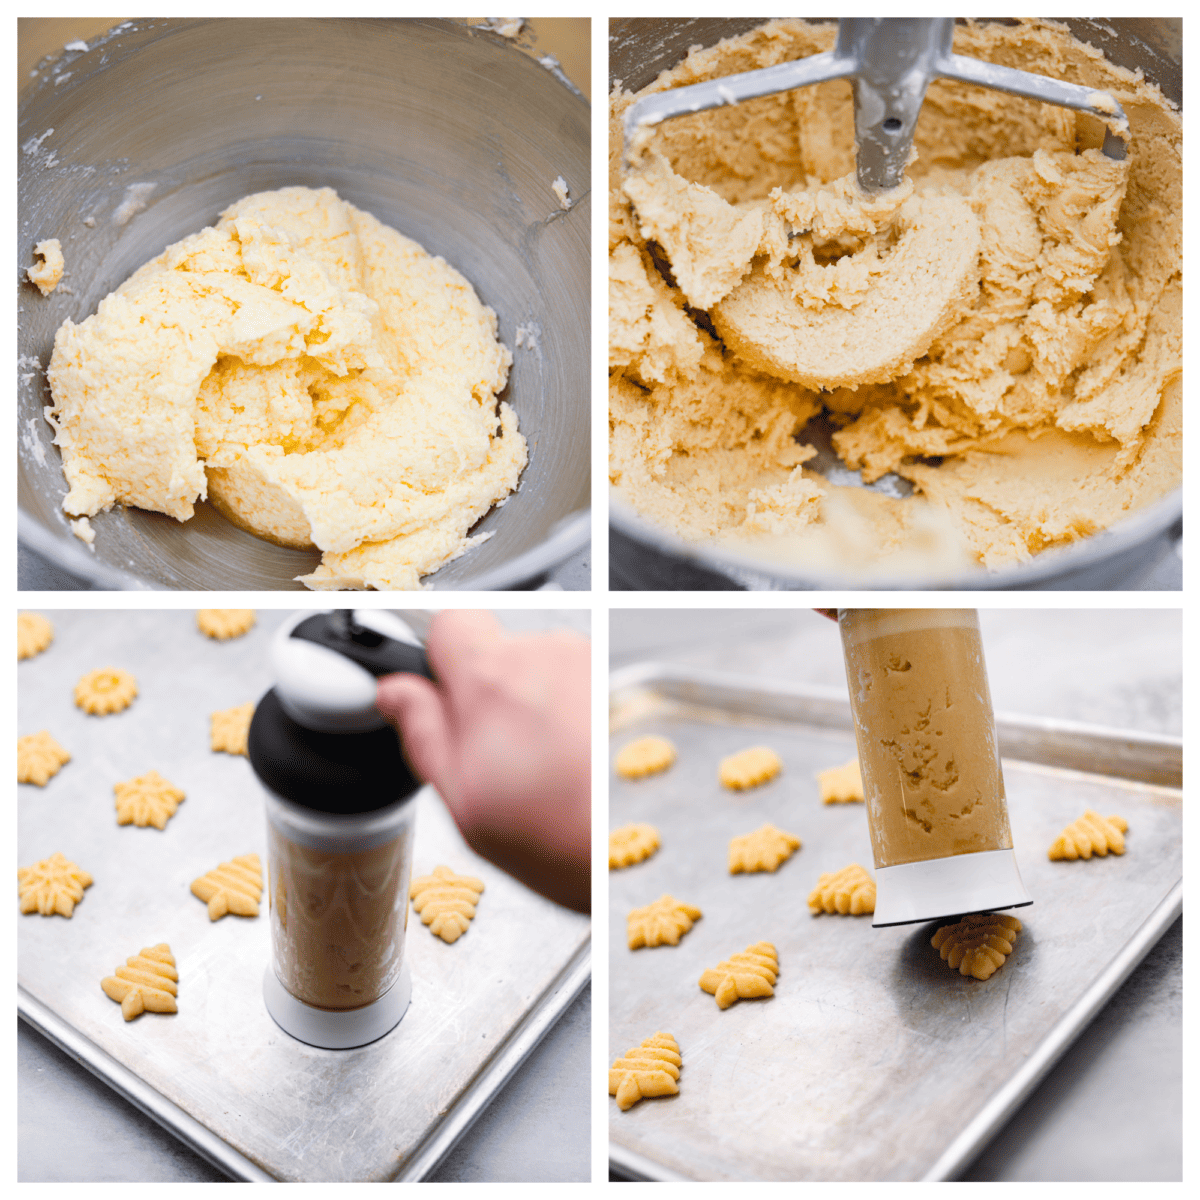 4-photo collage of the dough being prepared and put through a cookie press.